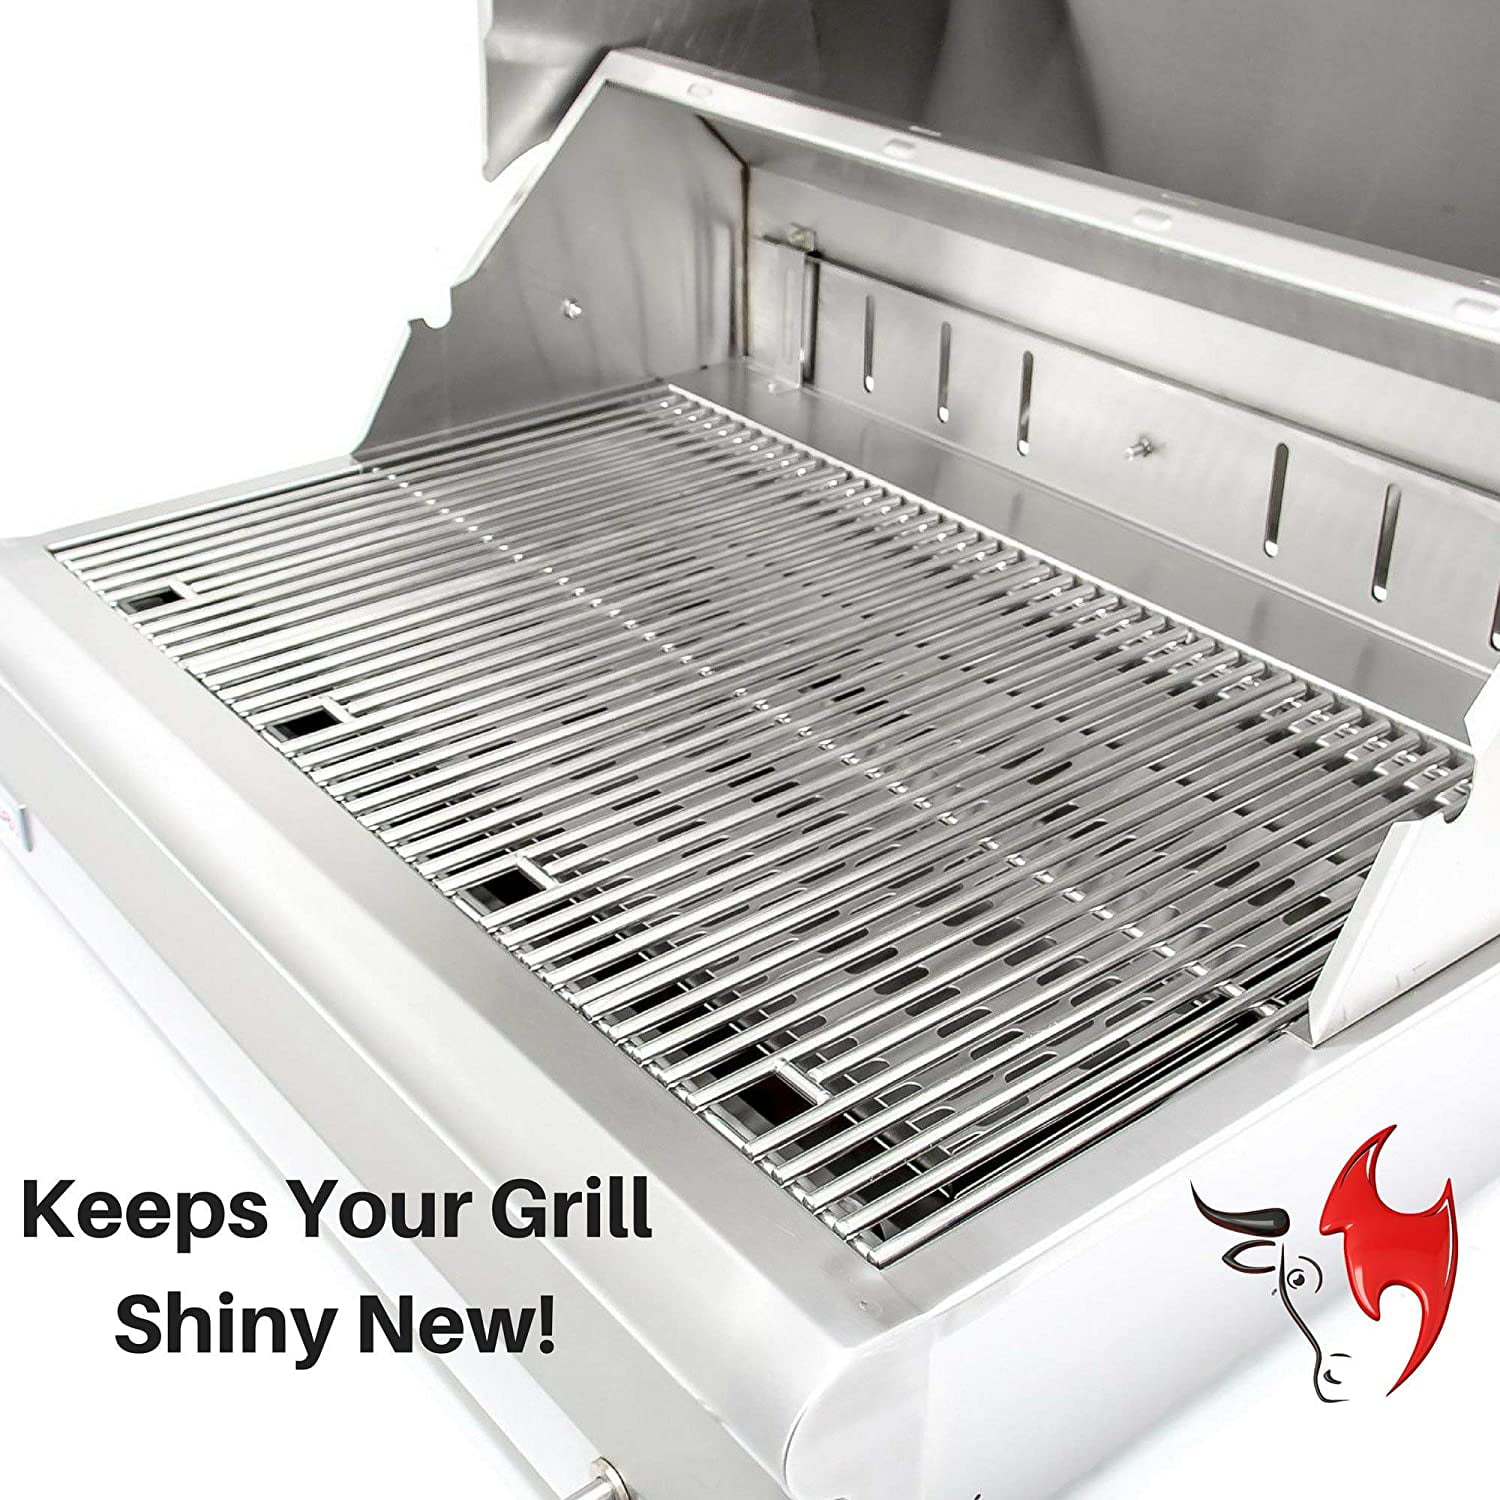 No More Metal Bristles On My BBQ! The SAFE/CLEAN Bristle Free